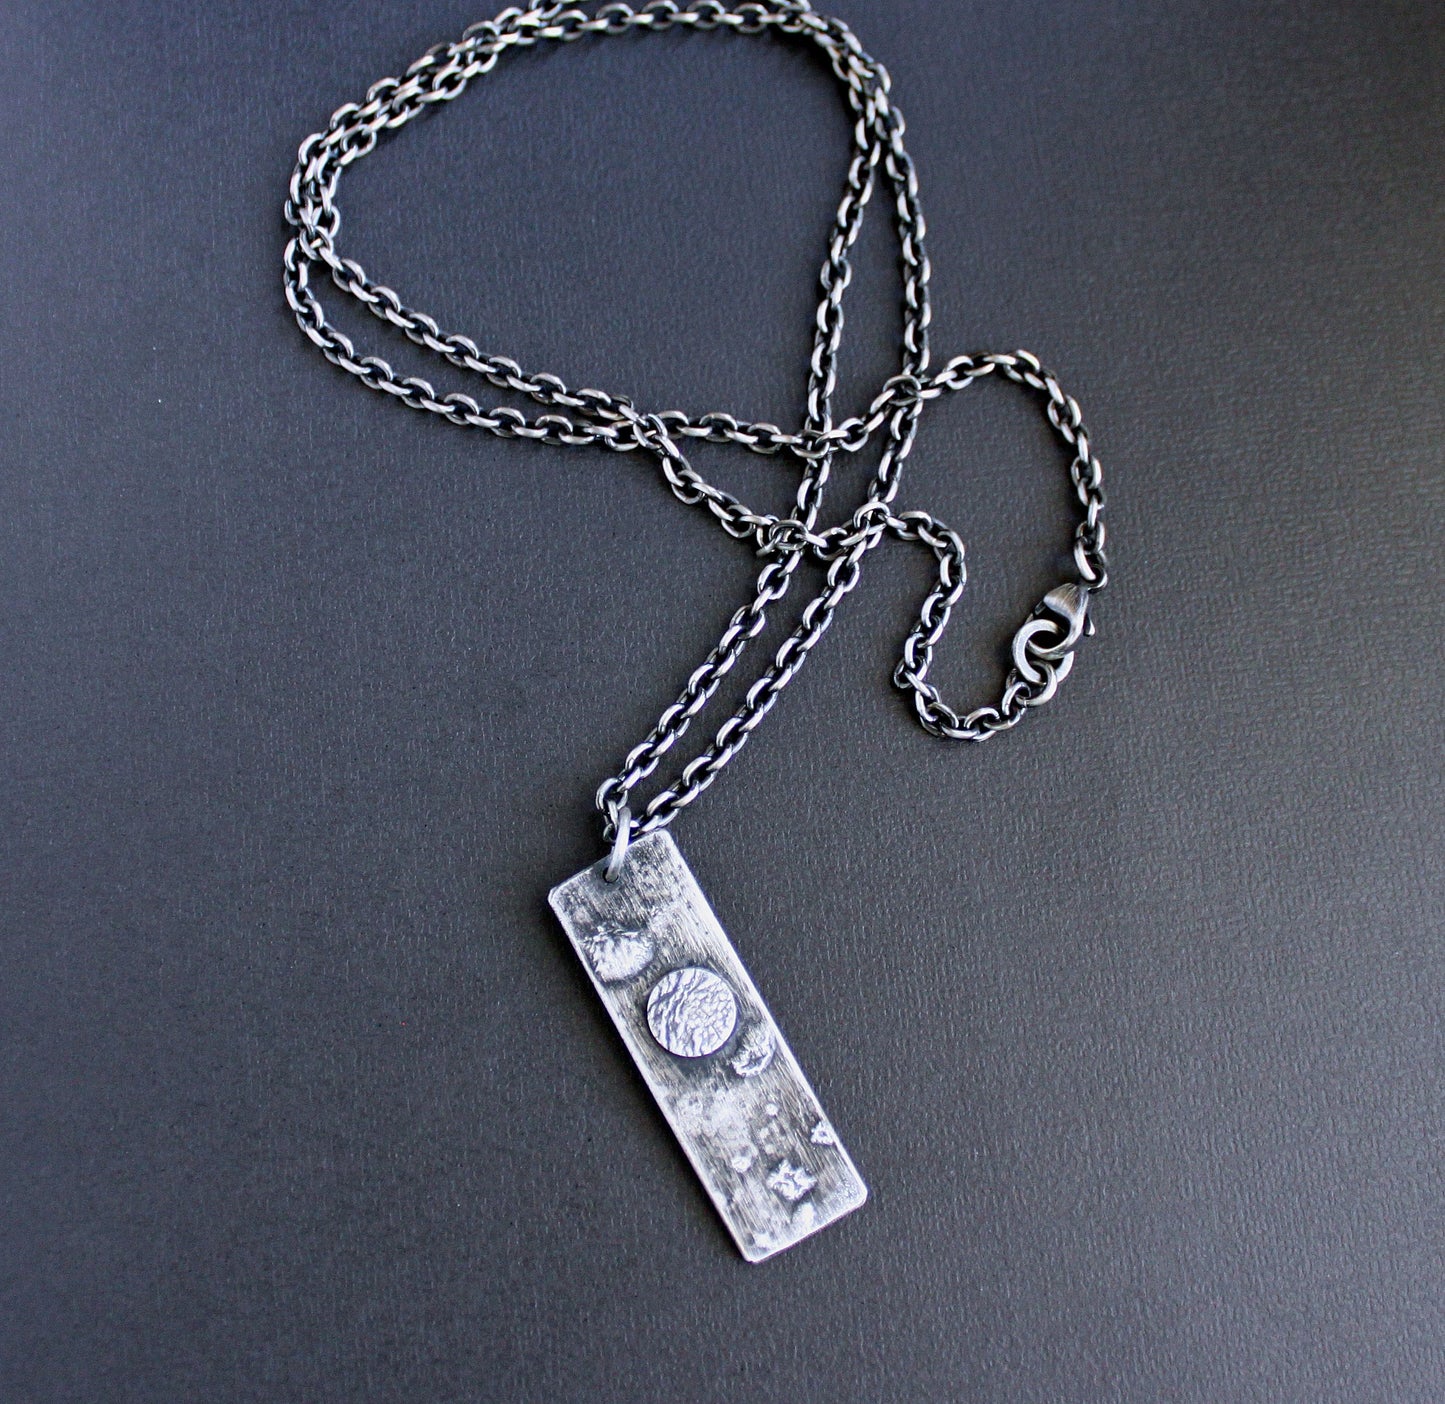 Reticulated Silver "Space" Pendant Necklace